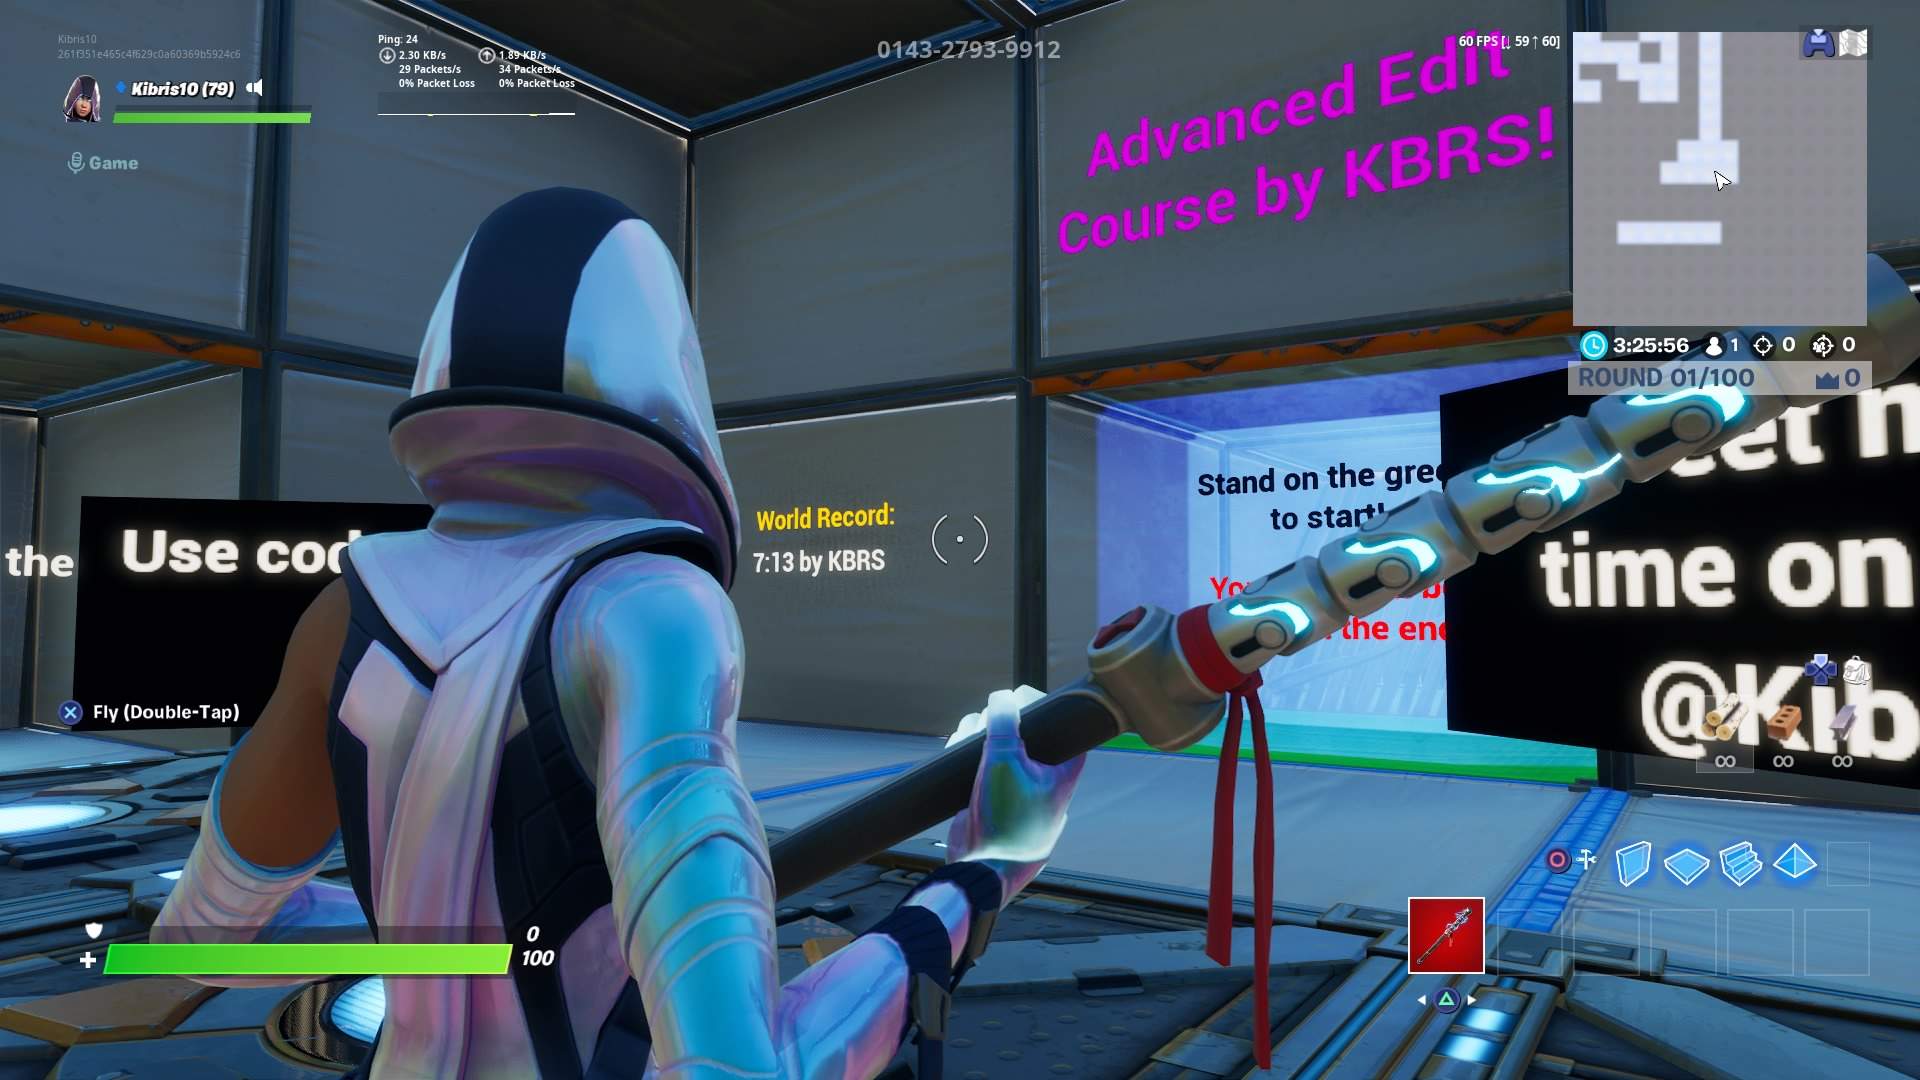 ADVANCED EDIT COURSE BY KBRS